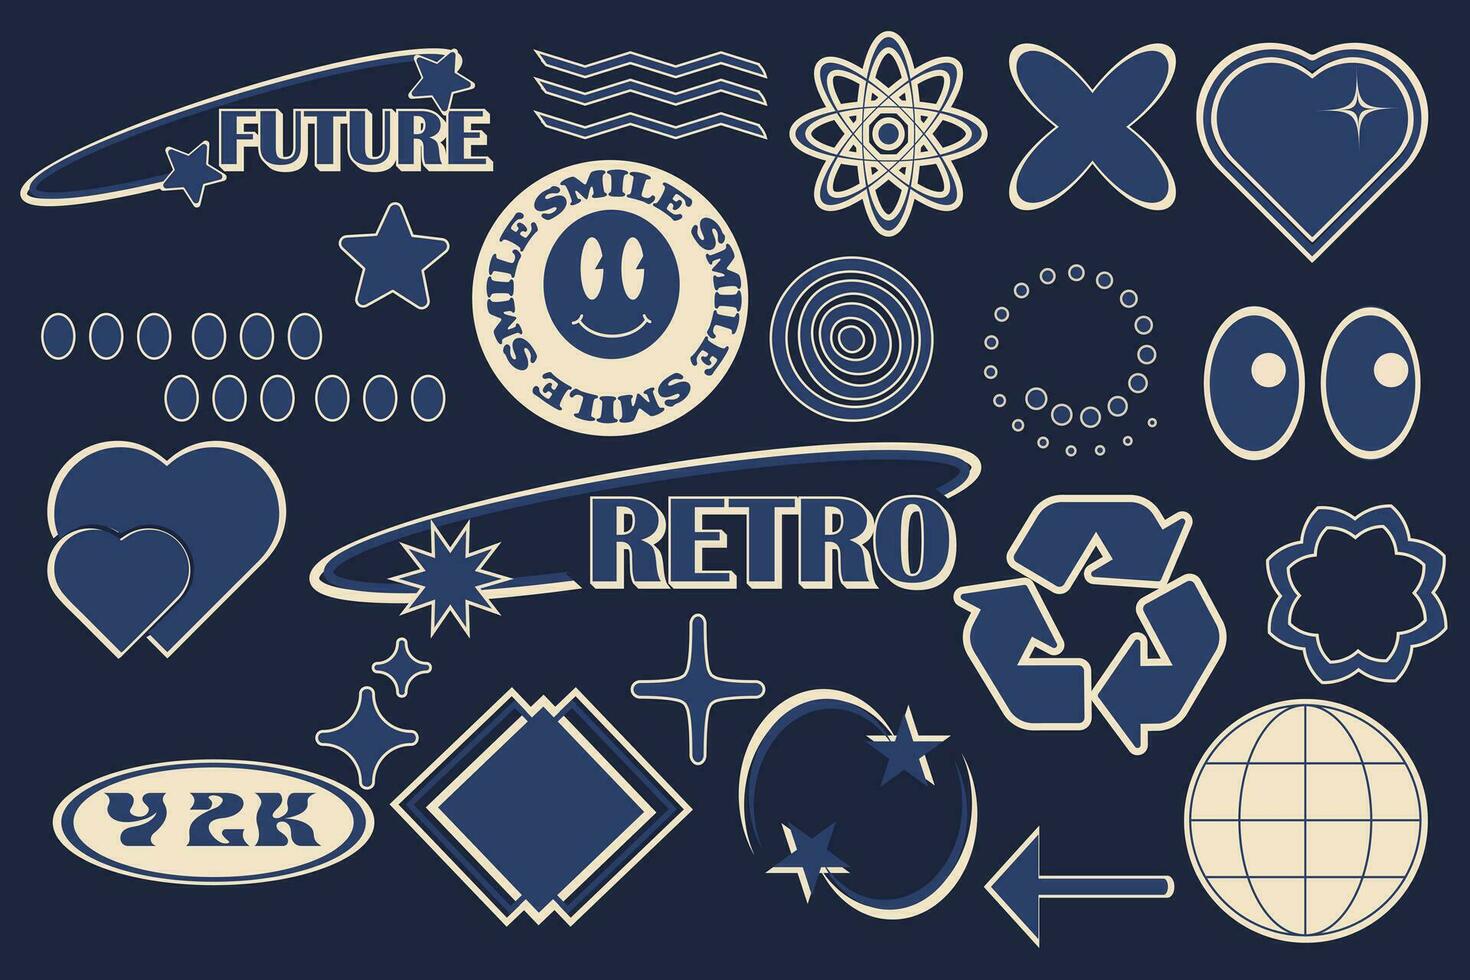 Retro futuristic sticker. Collection of abstract graphic geometric symbols and objects in y2k style. Templates for notes, posters, banners, stickers, business cards, logo. Nostalgia for 2000s. vector